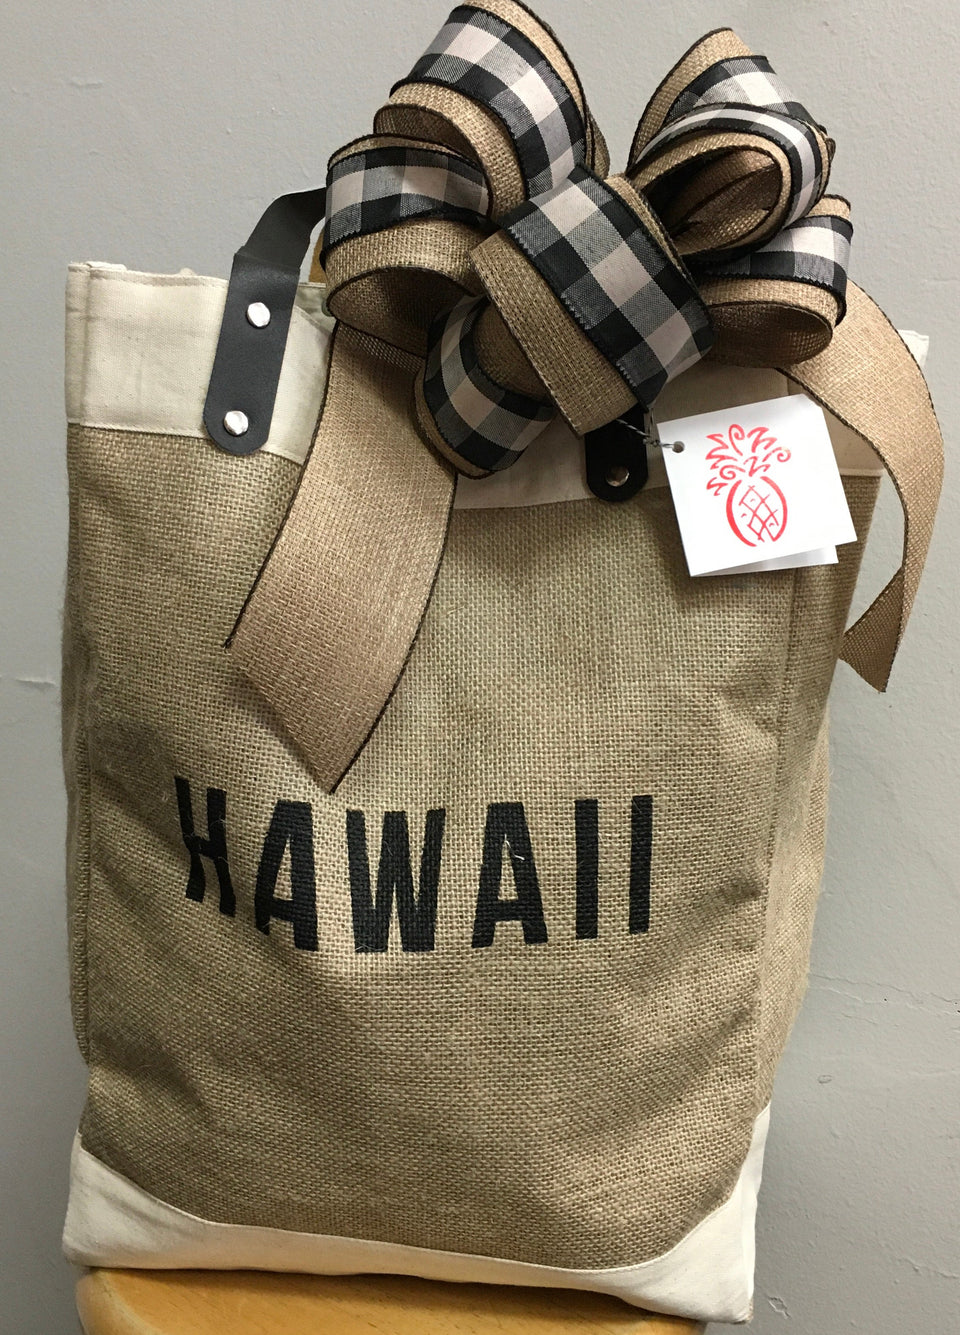 Large burlap tote with hawaii printed on the outside